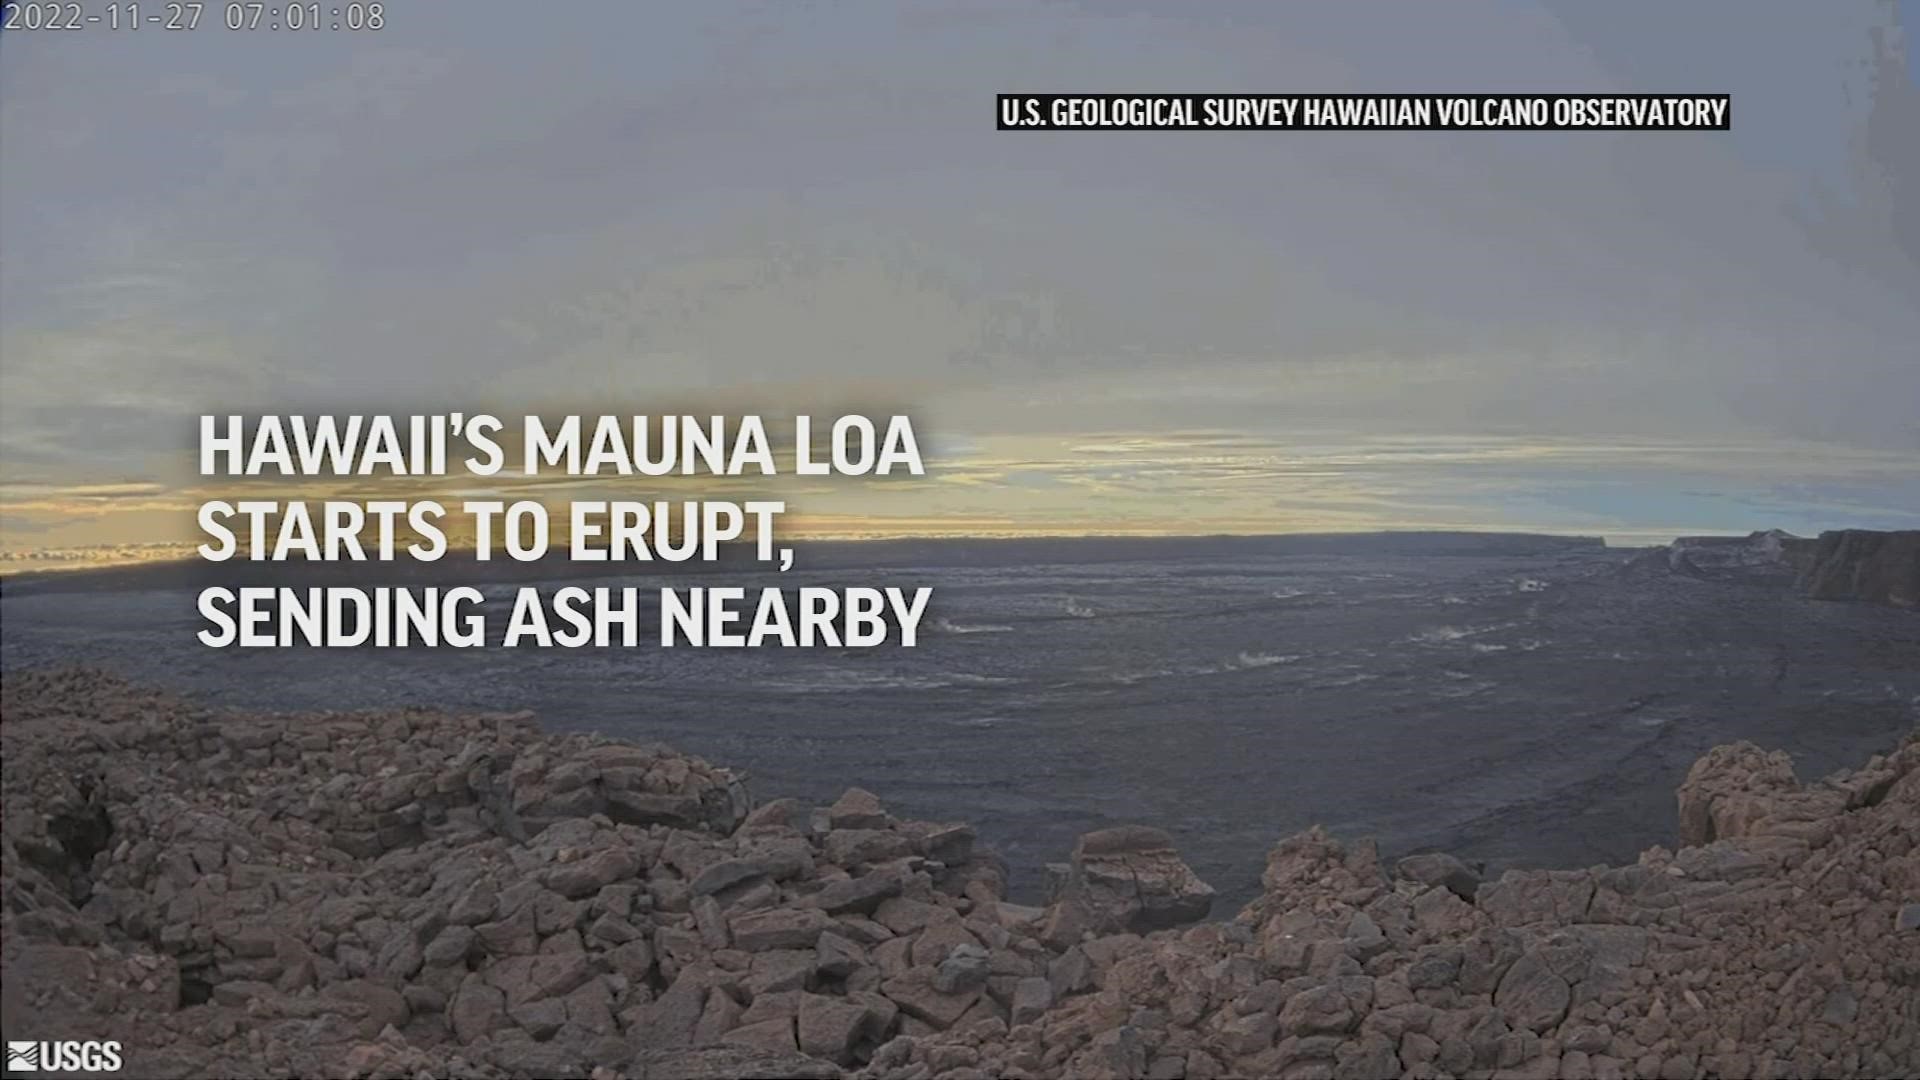 Earlier Monday, the USGS said the lava flow was contained in the summit area and did not pose a threat to nearby communities.